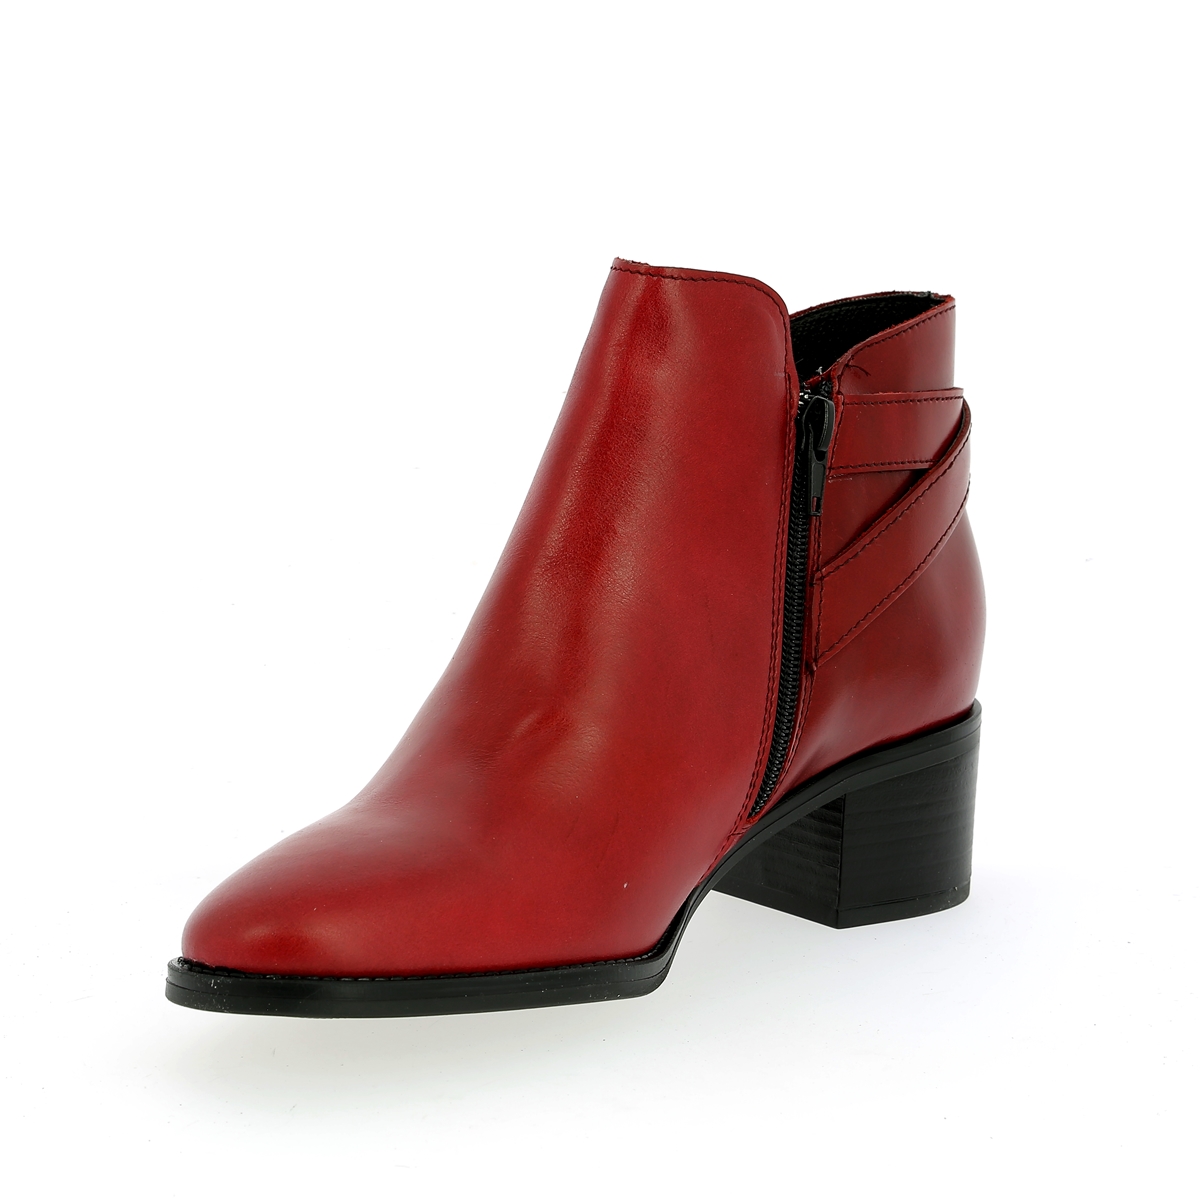 Cypres Boots rood